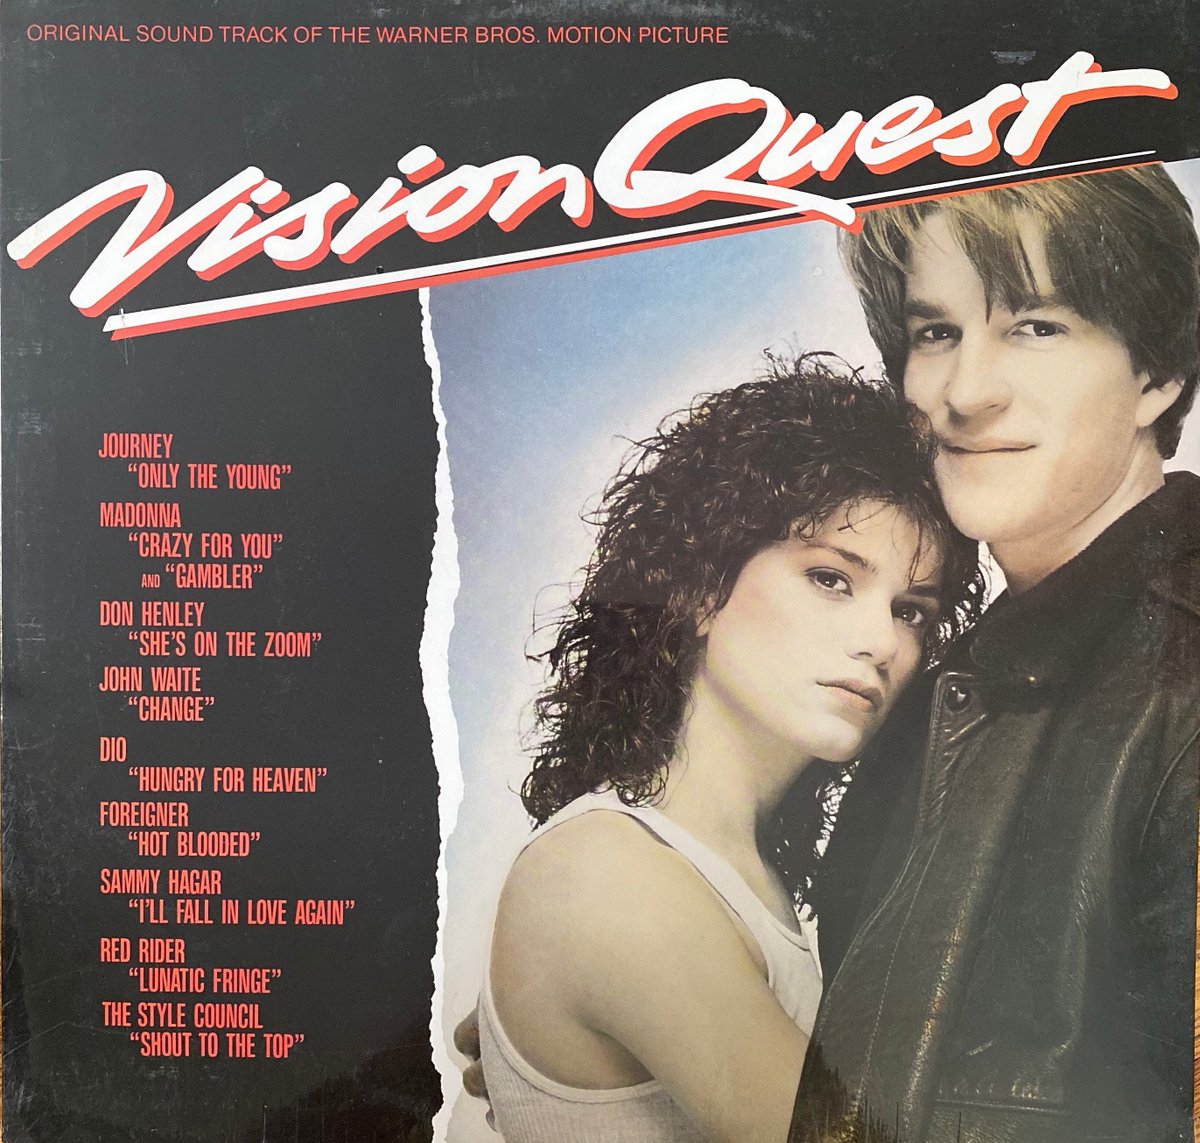 #OnThisDay in 1985, the soundtrack for the film 'Vision Quest' was released. One of my favorite soundtracks of the #80s, it featured songs by Madonna, Journey, Foreigner and more. It peaked at #11 on the Billboard album chart and is certified platinum in the US #80smusic